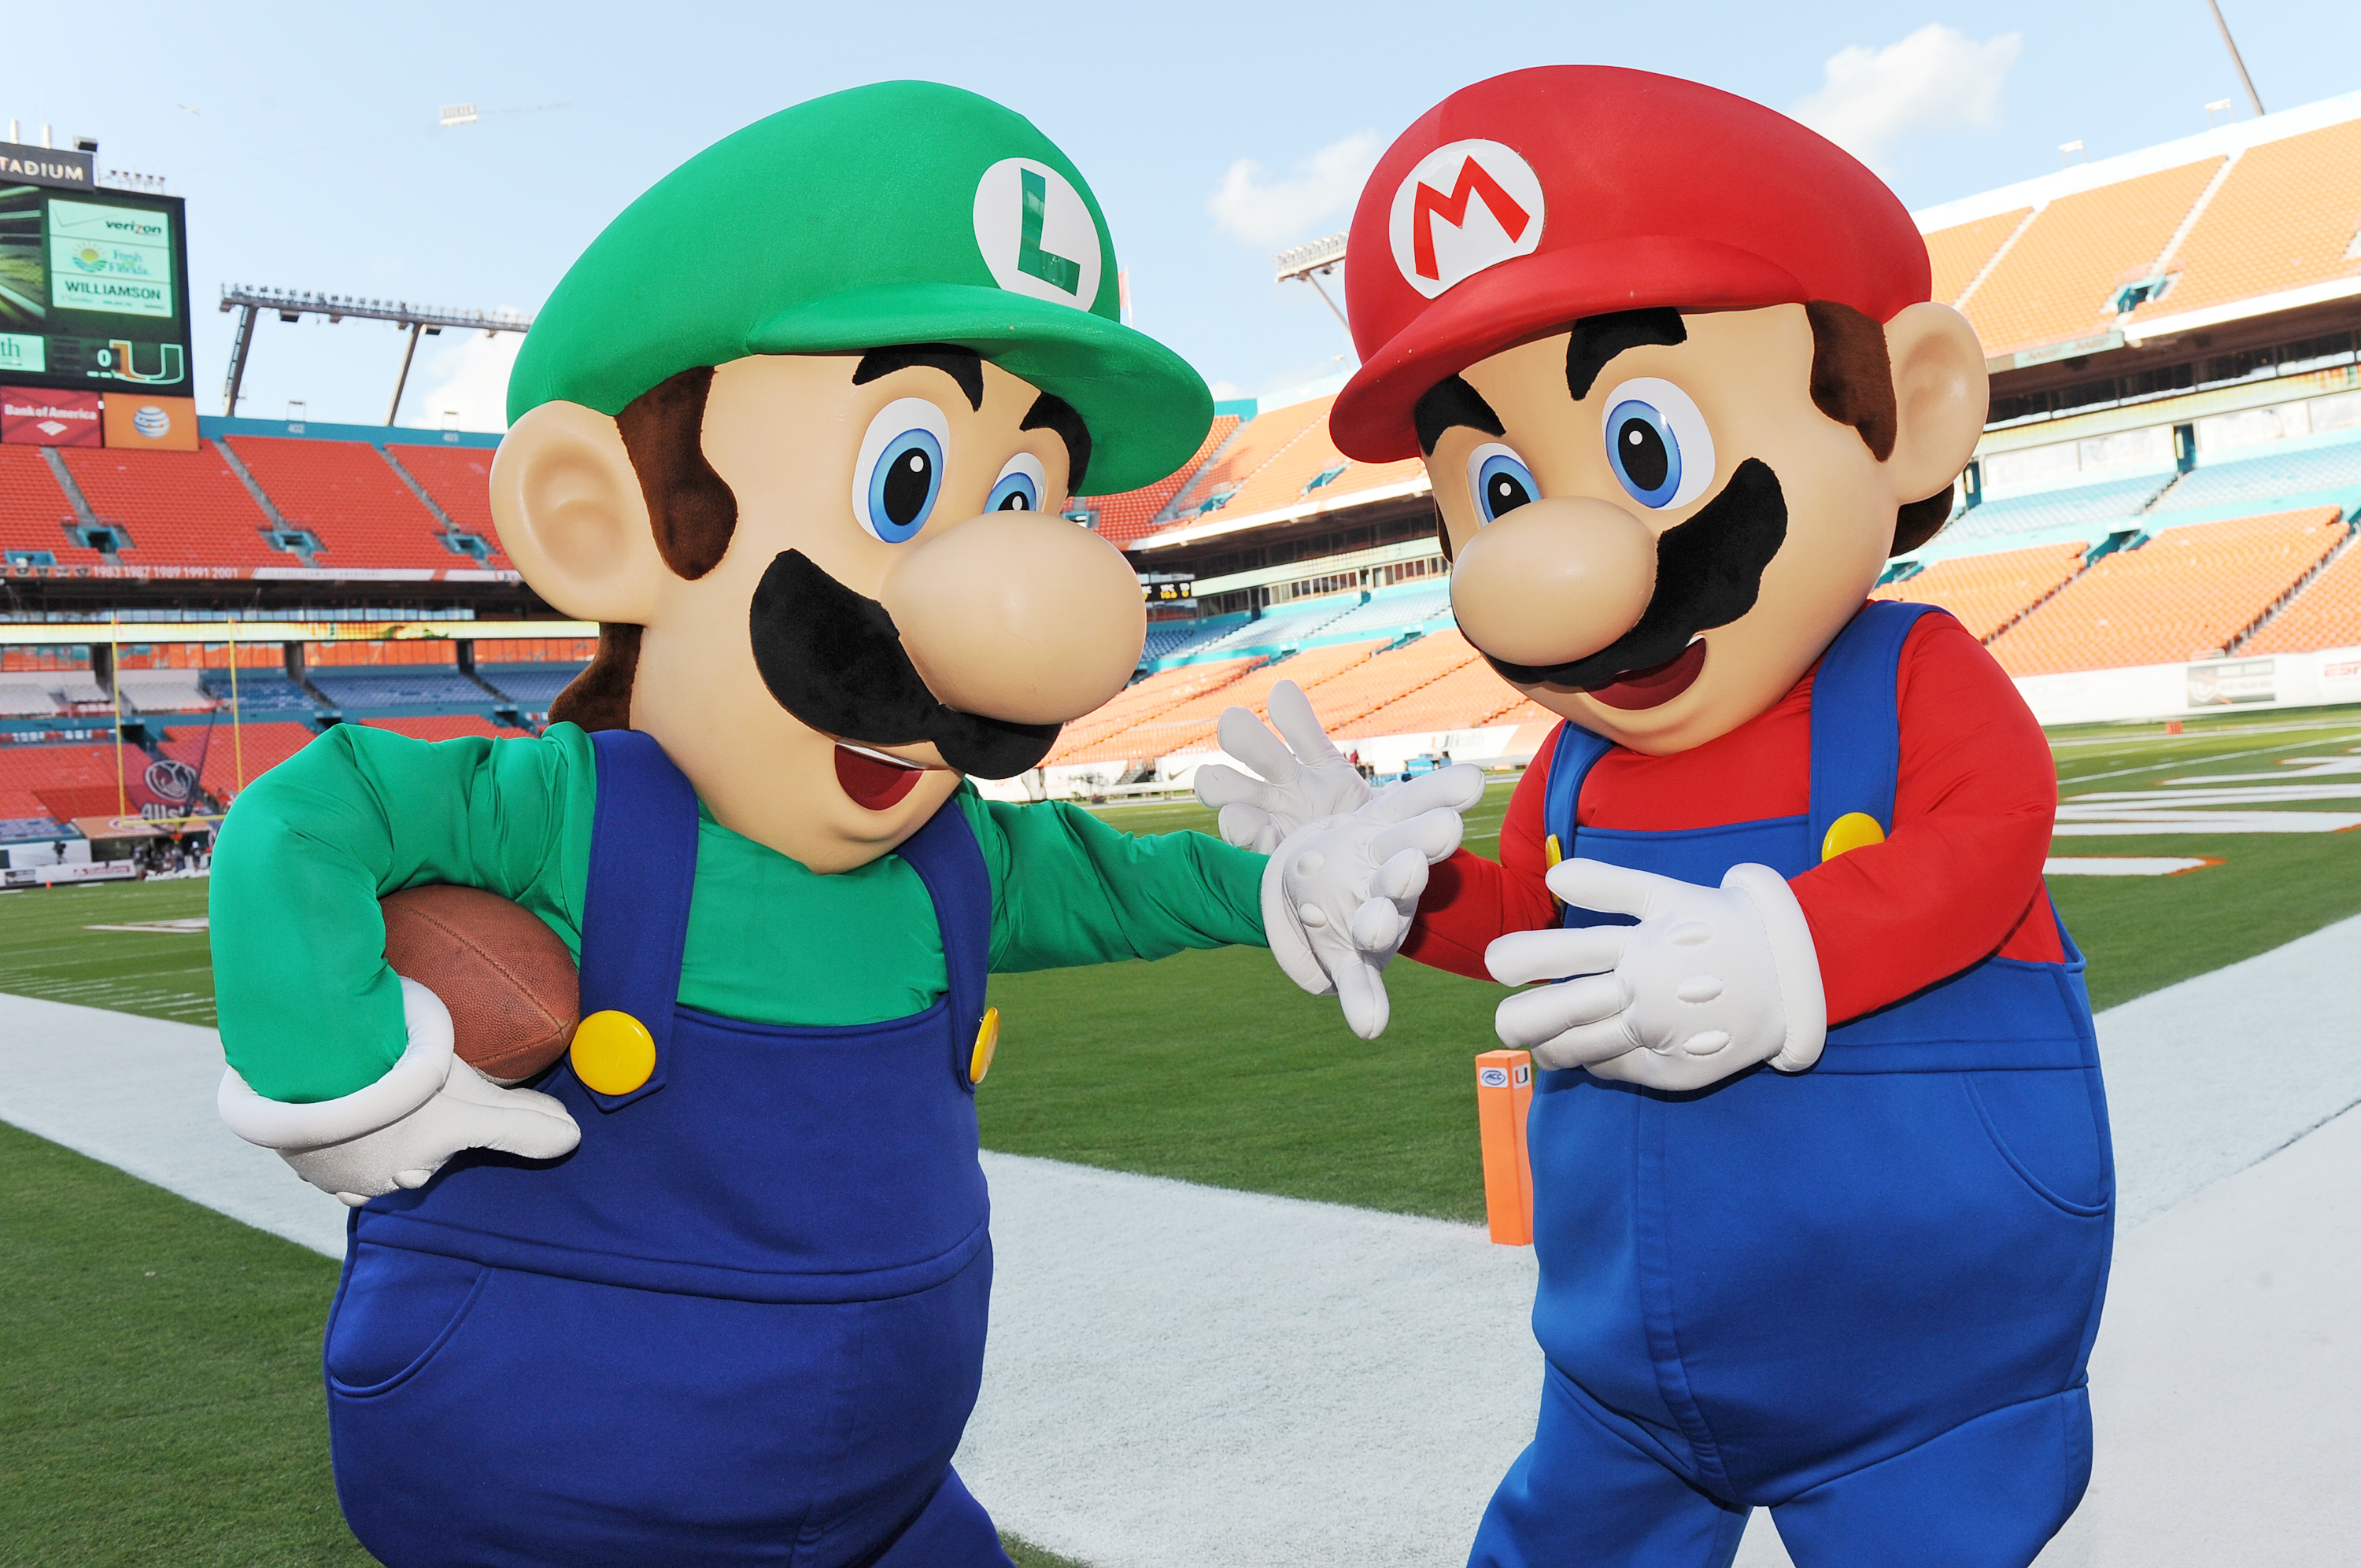 Mario and Luigi take the field at Sun Life Stadium before the face-off between Florida State and University of Miami on Nov. 15, 2014